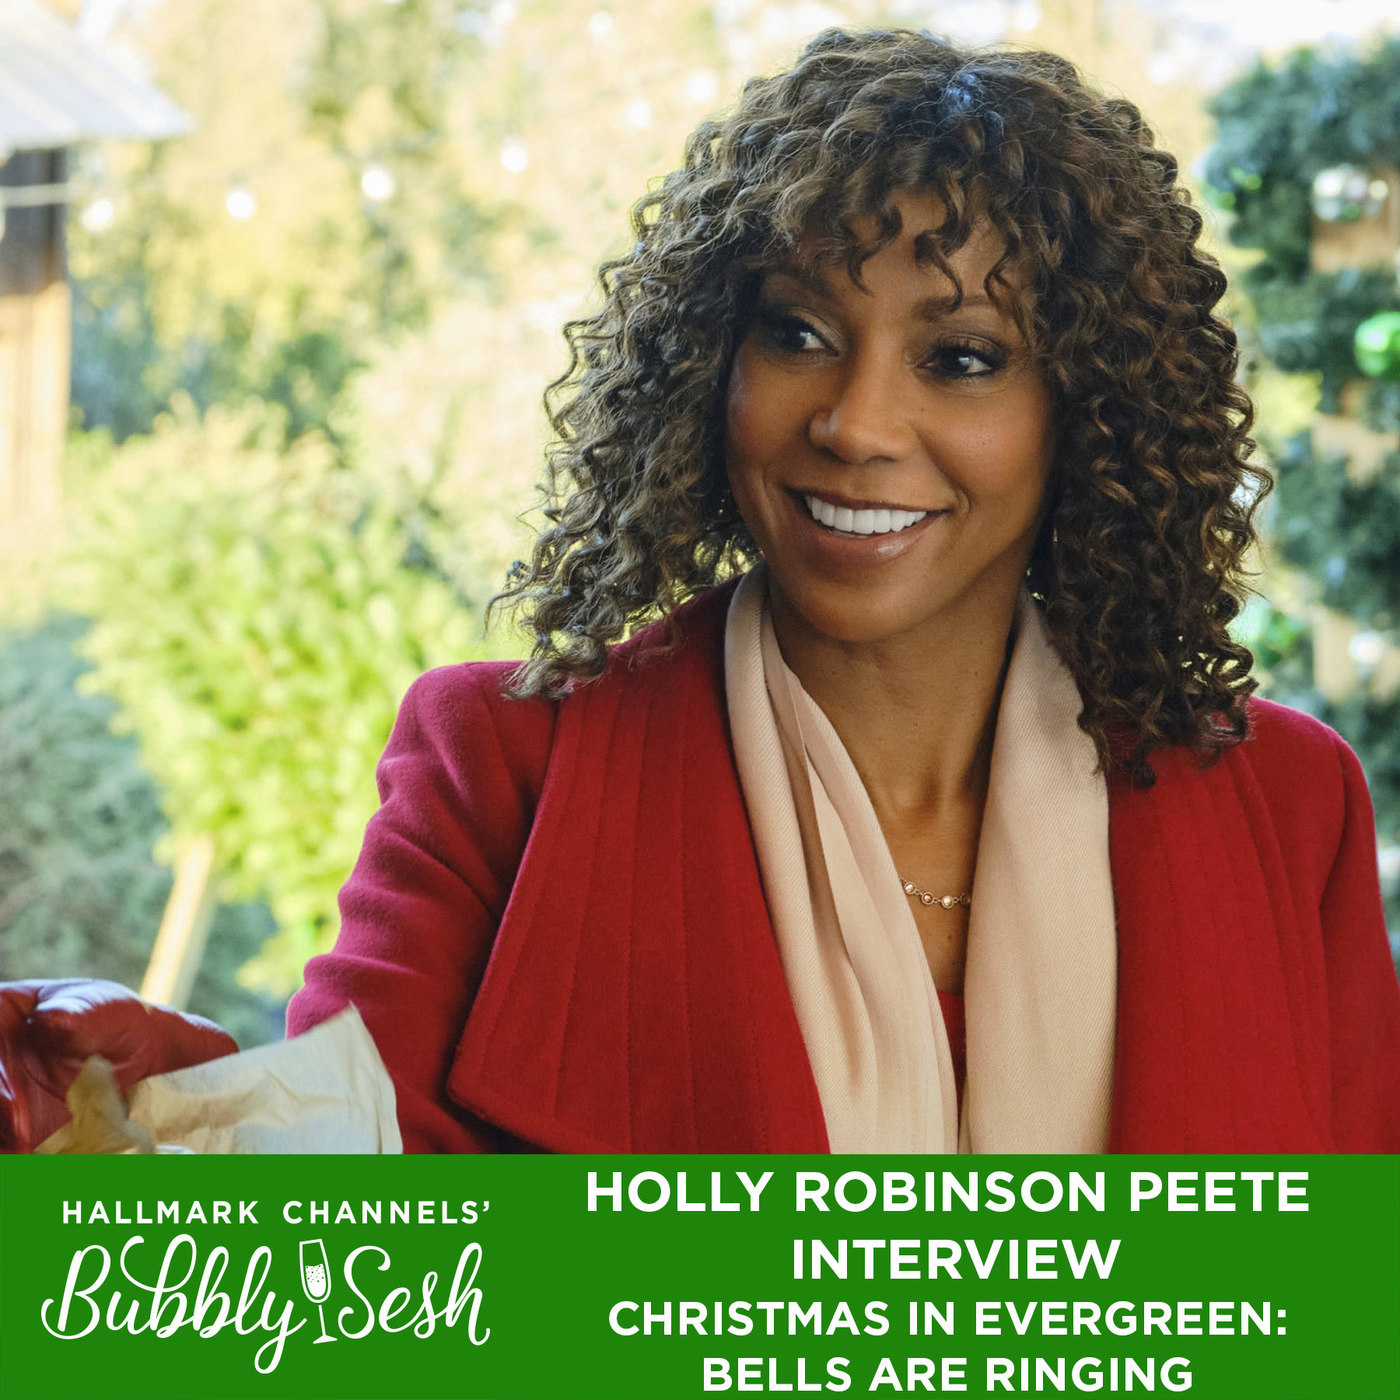 Holly Robinson Peete Interview